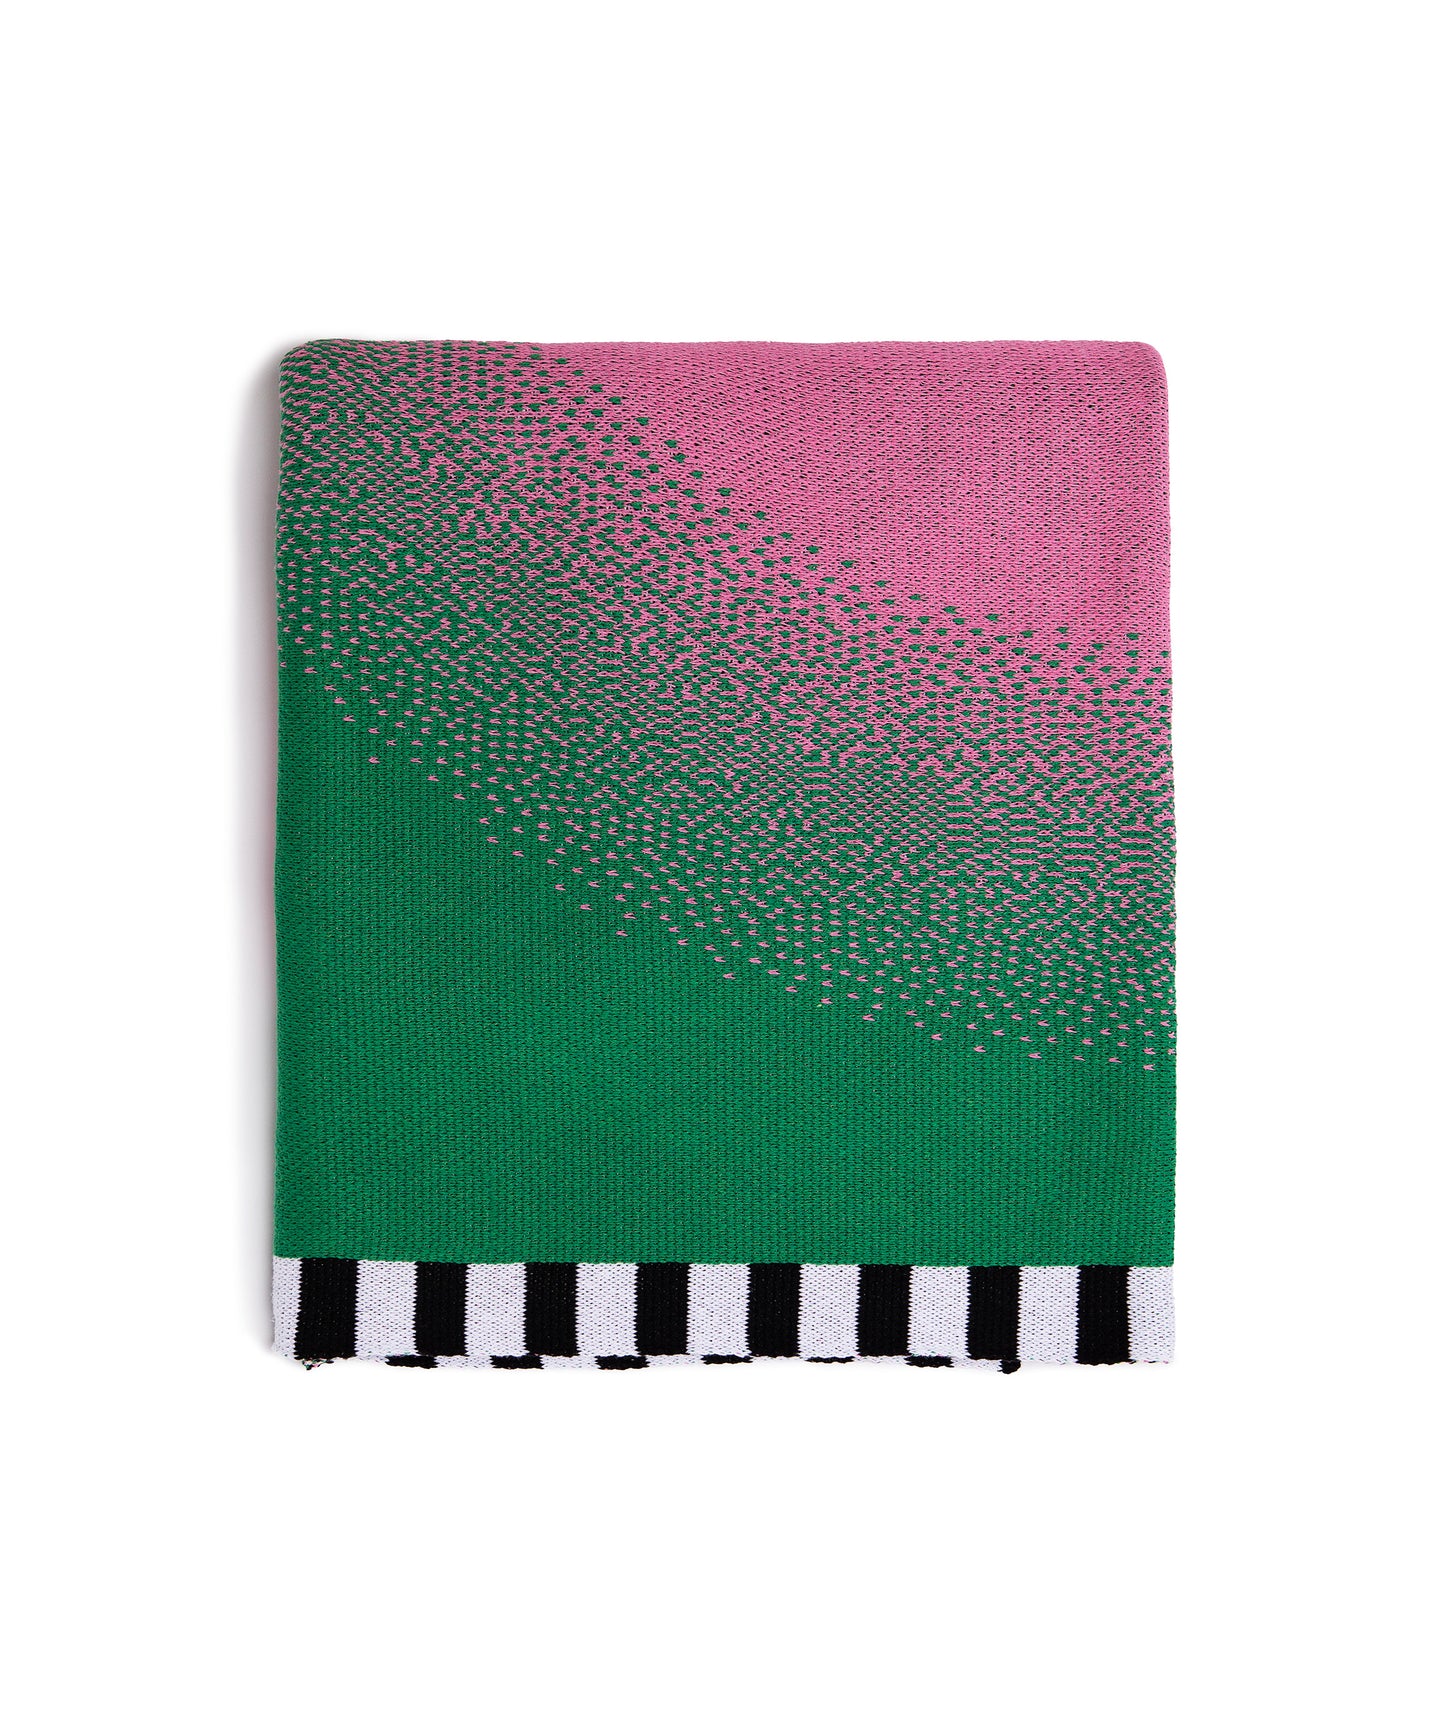 Detail image of Burst blanket showing how it looks folded into a square. Shows a close up of pink circle gradually fading into green background with the black and white strip border along the bottom.